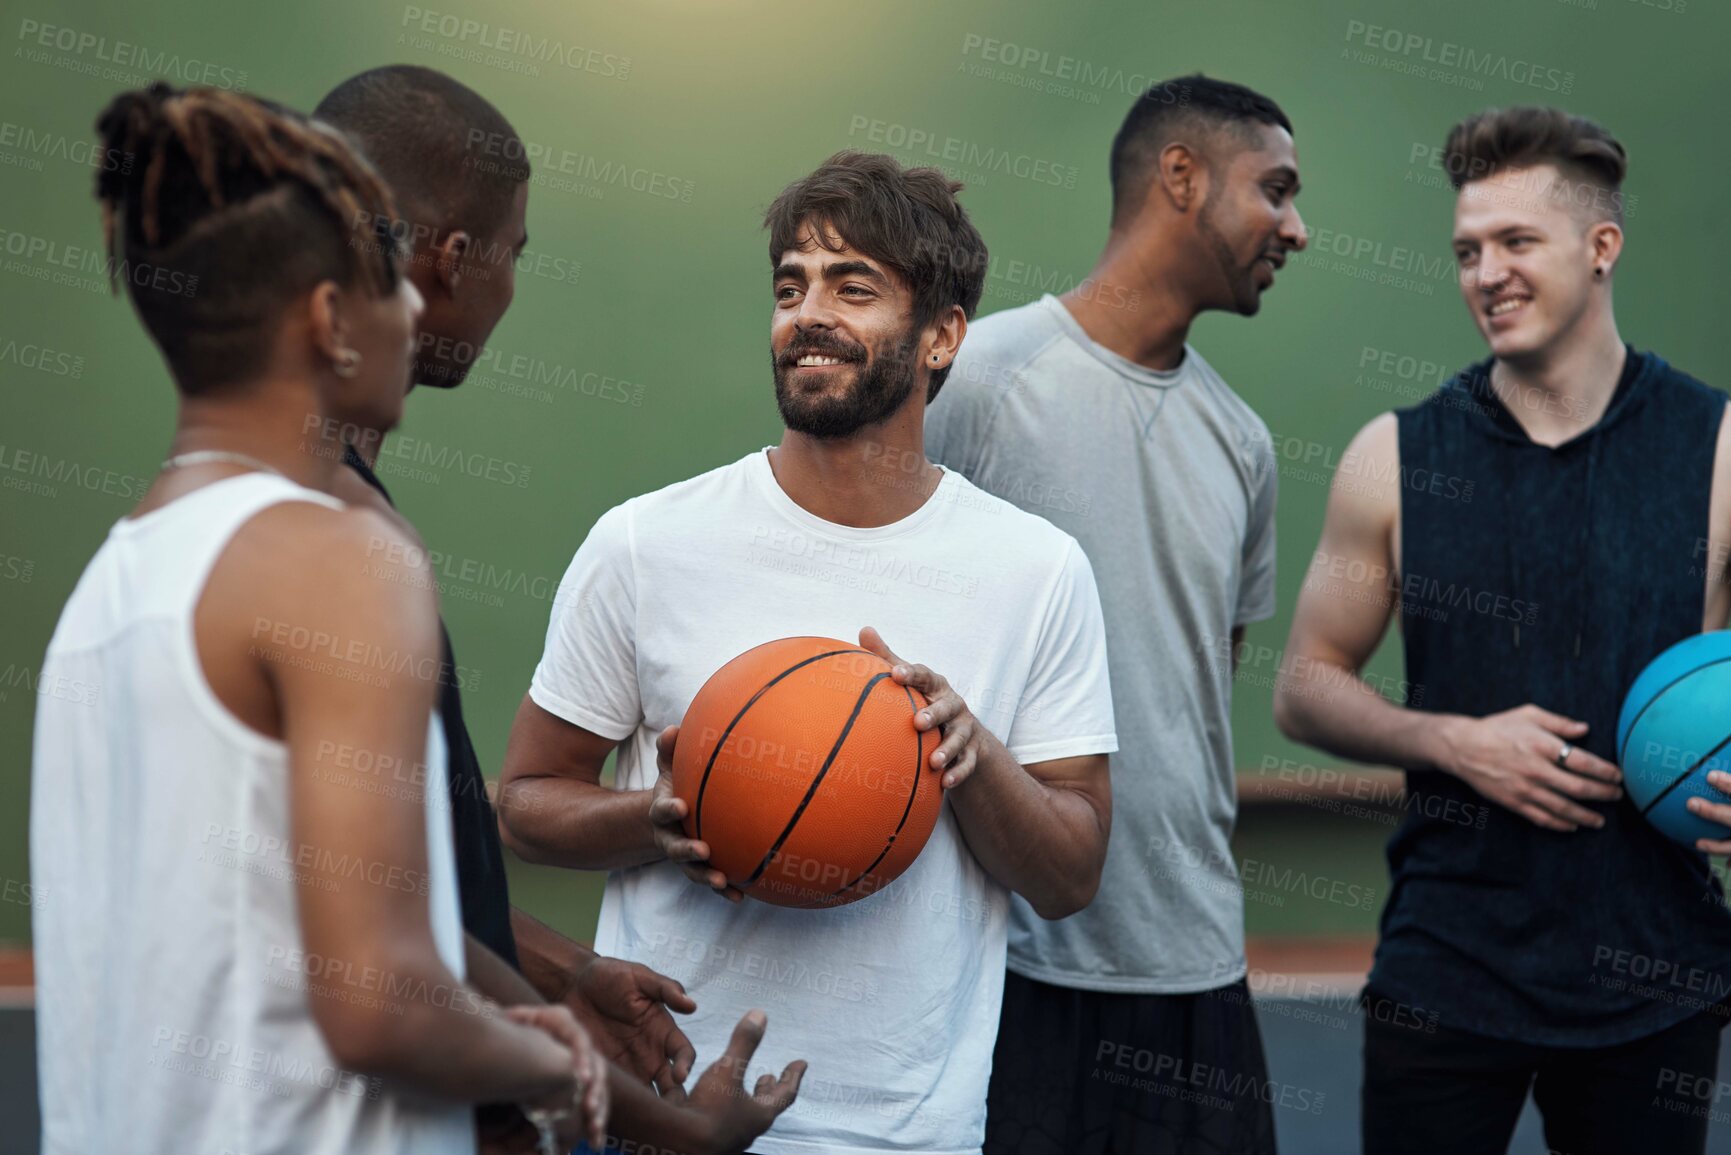 Buy stock photo Shot of a group of sporty young men hanging out on a basketball court